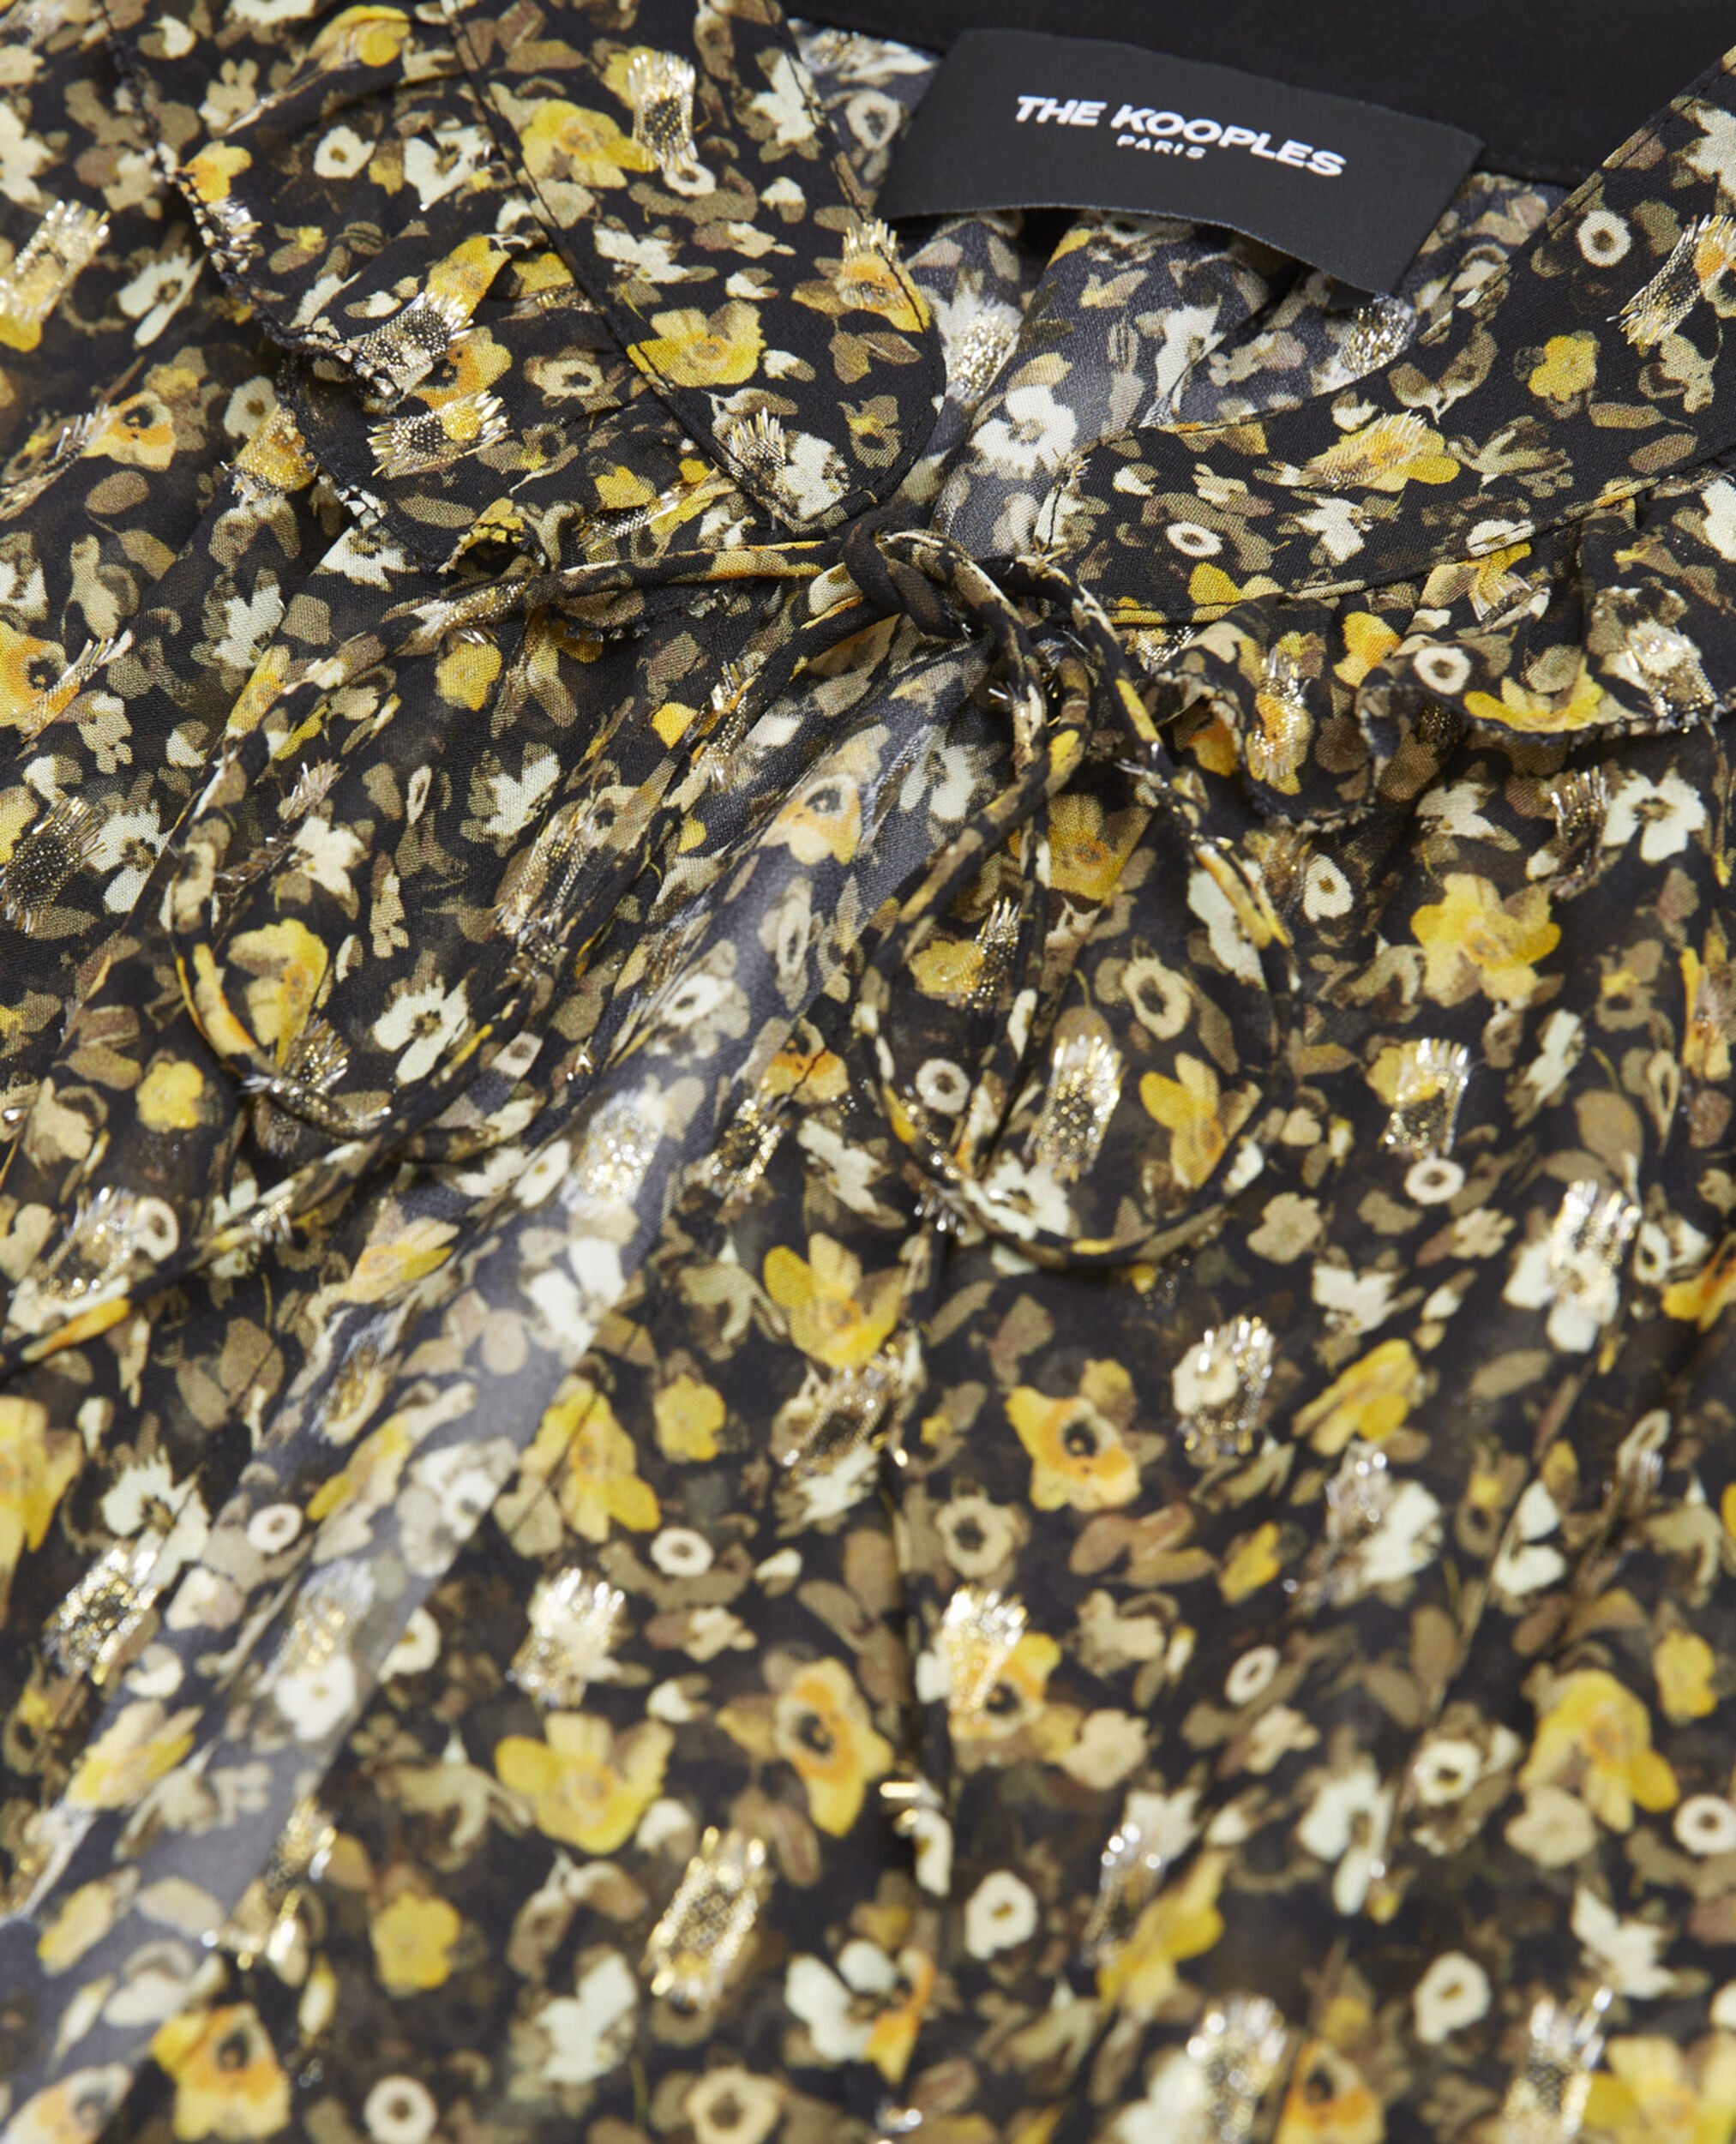 Floral black and yellow top in knotted silver details, BLACK-ORANGE, hi-res image number null